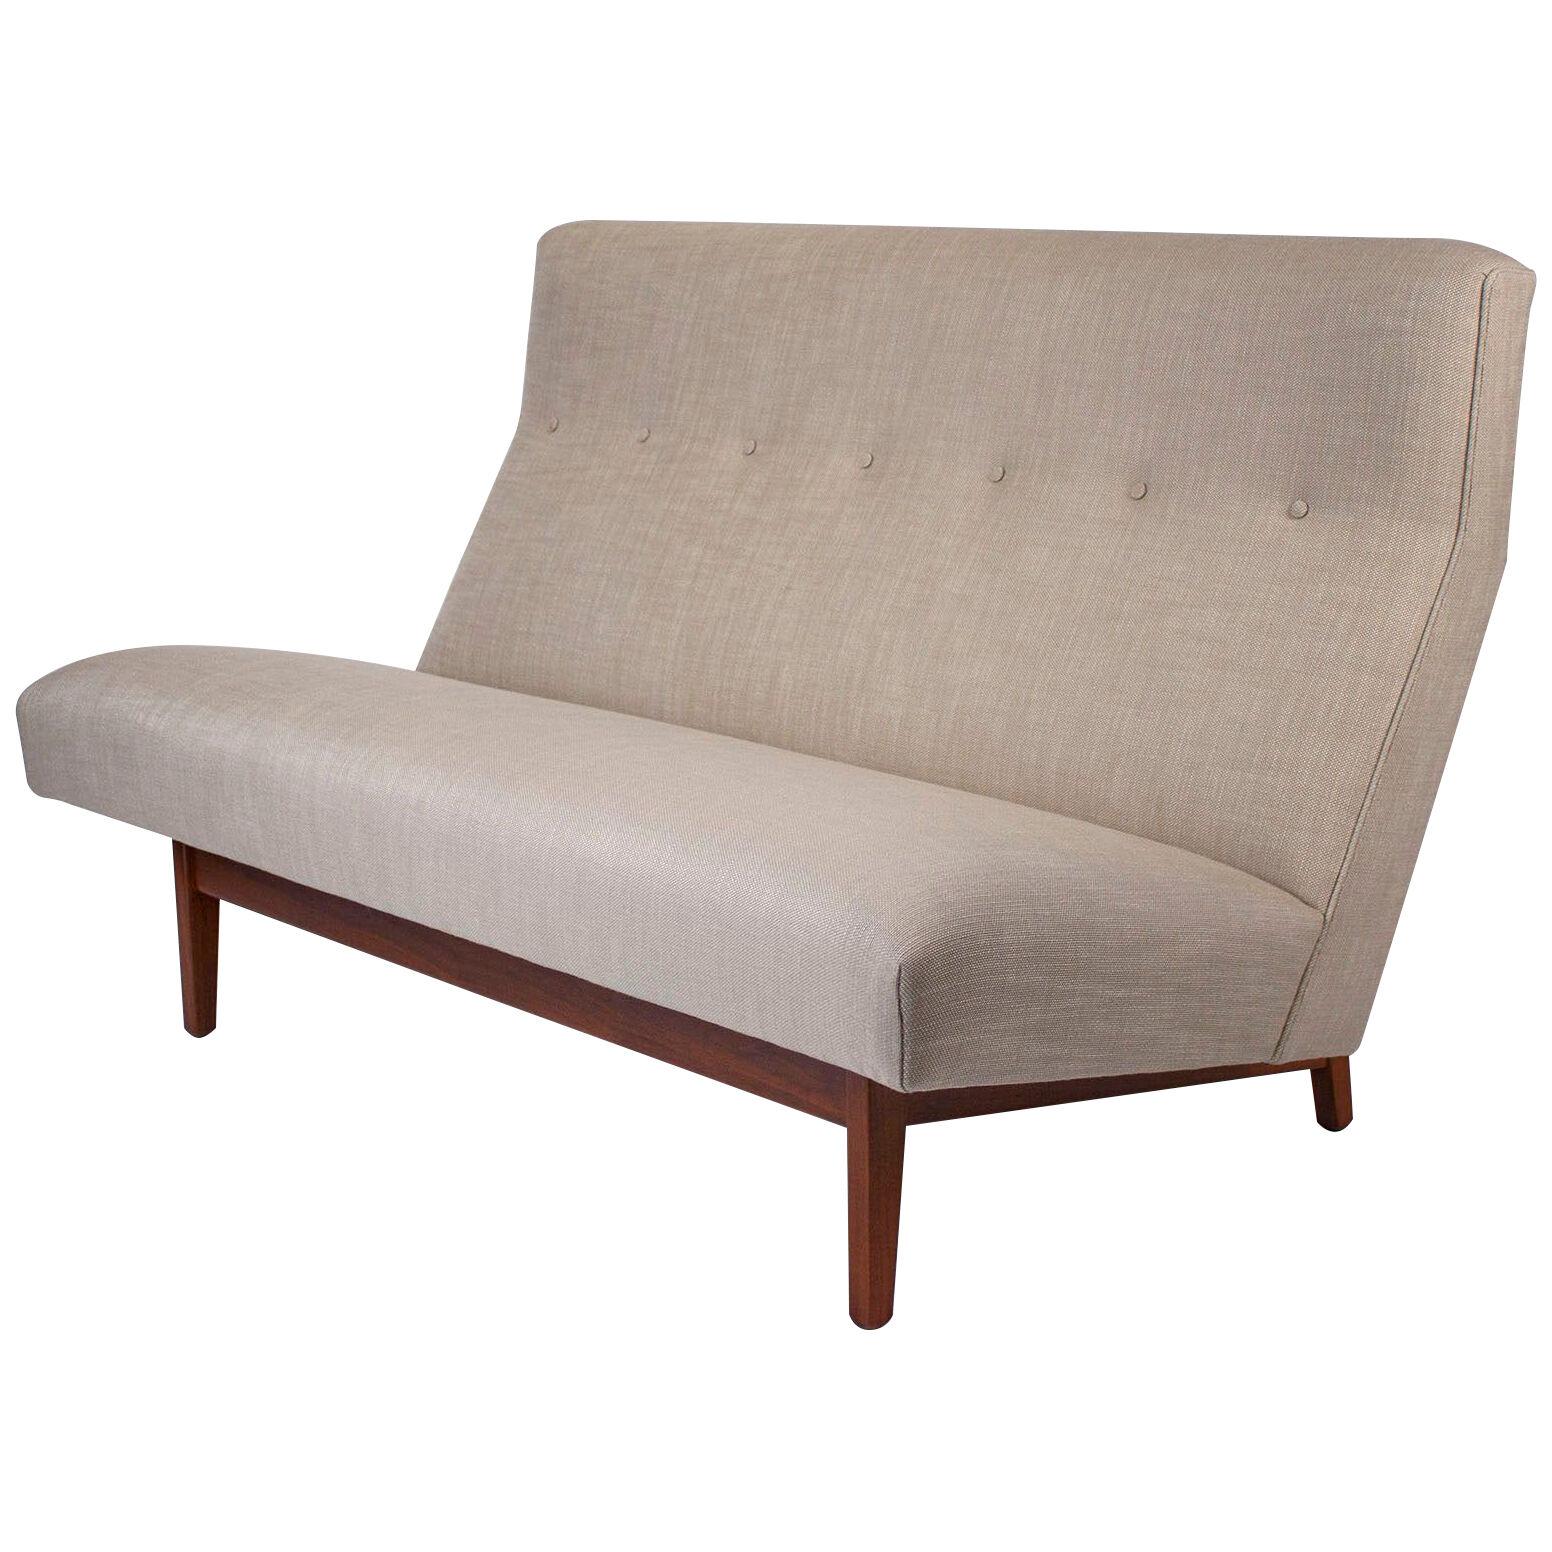 Jens Risom Armless Settee in Walnut Cradle Frames with Linen Upholstery